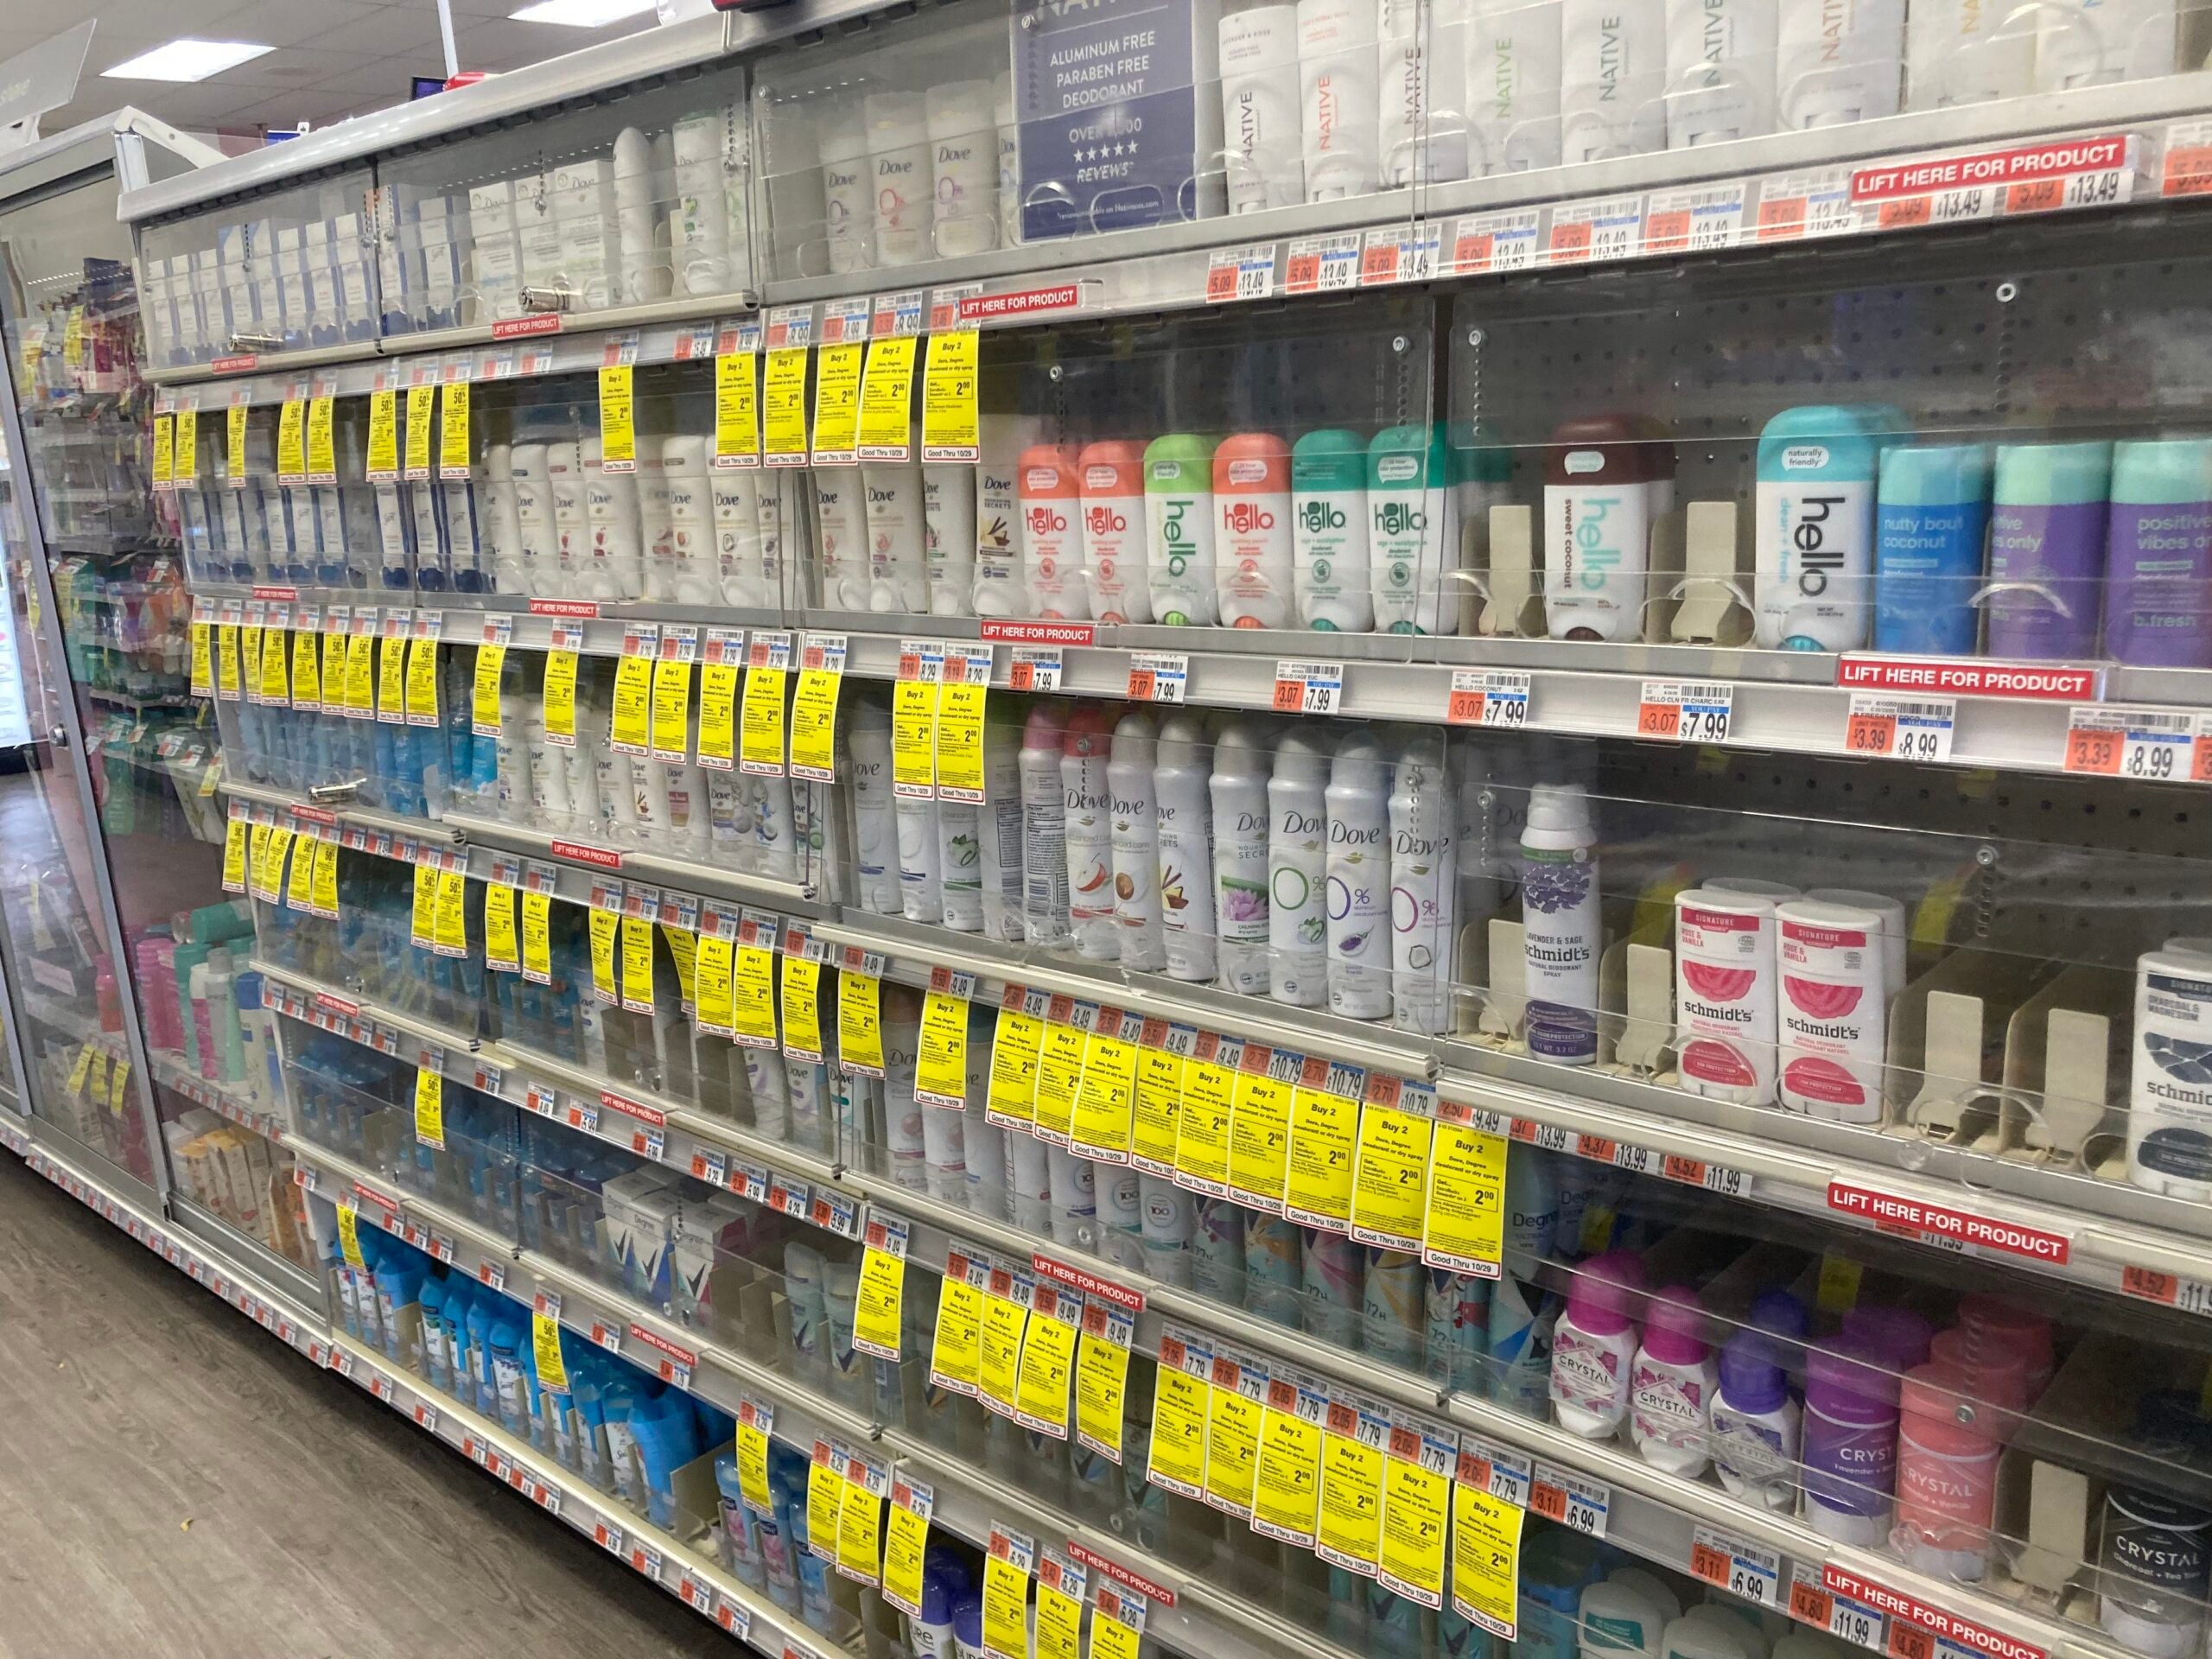 Here's why your body wash, deodorant, and toothpaste are locked up at the  drugstore